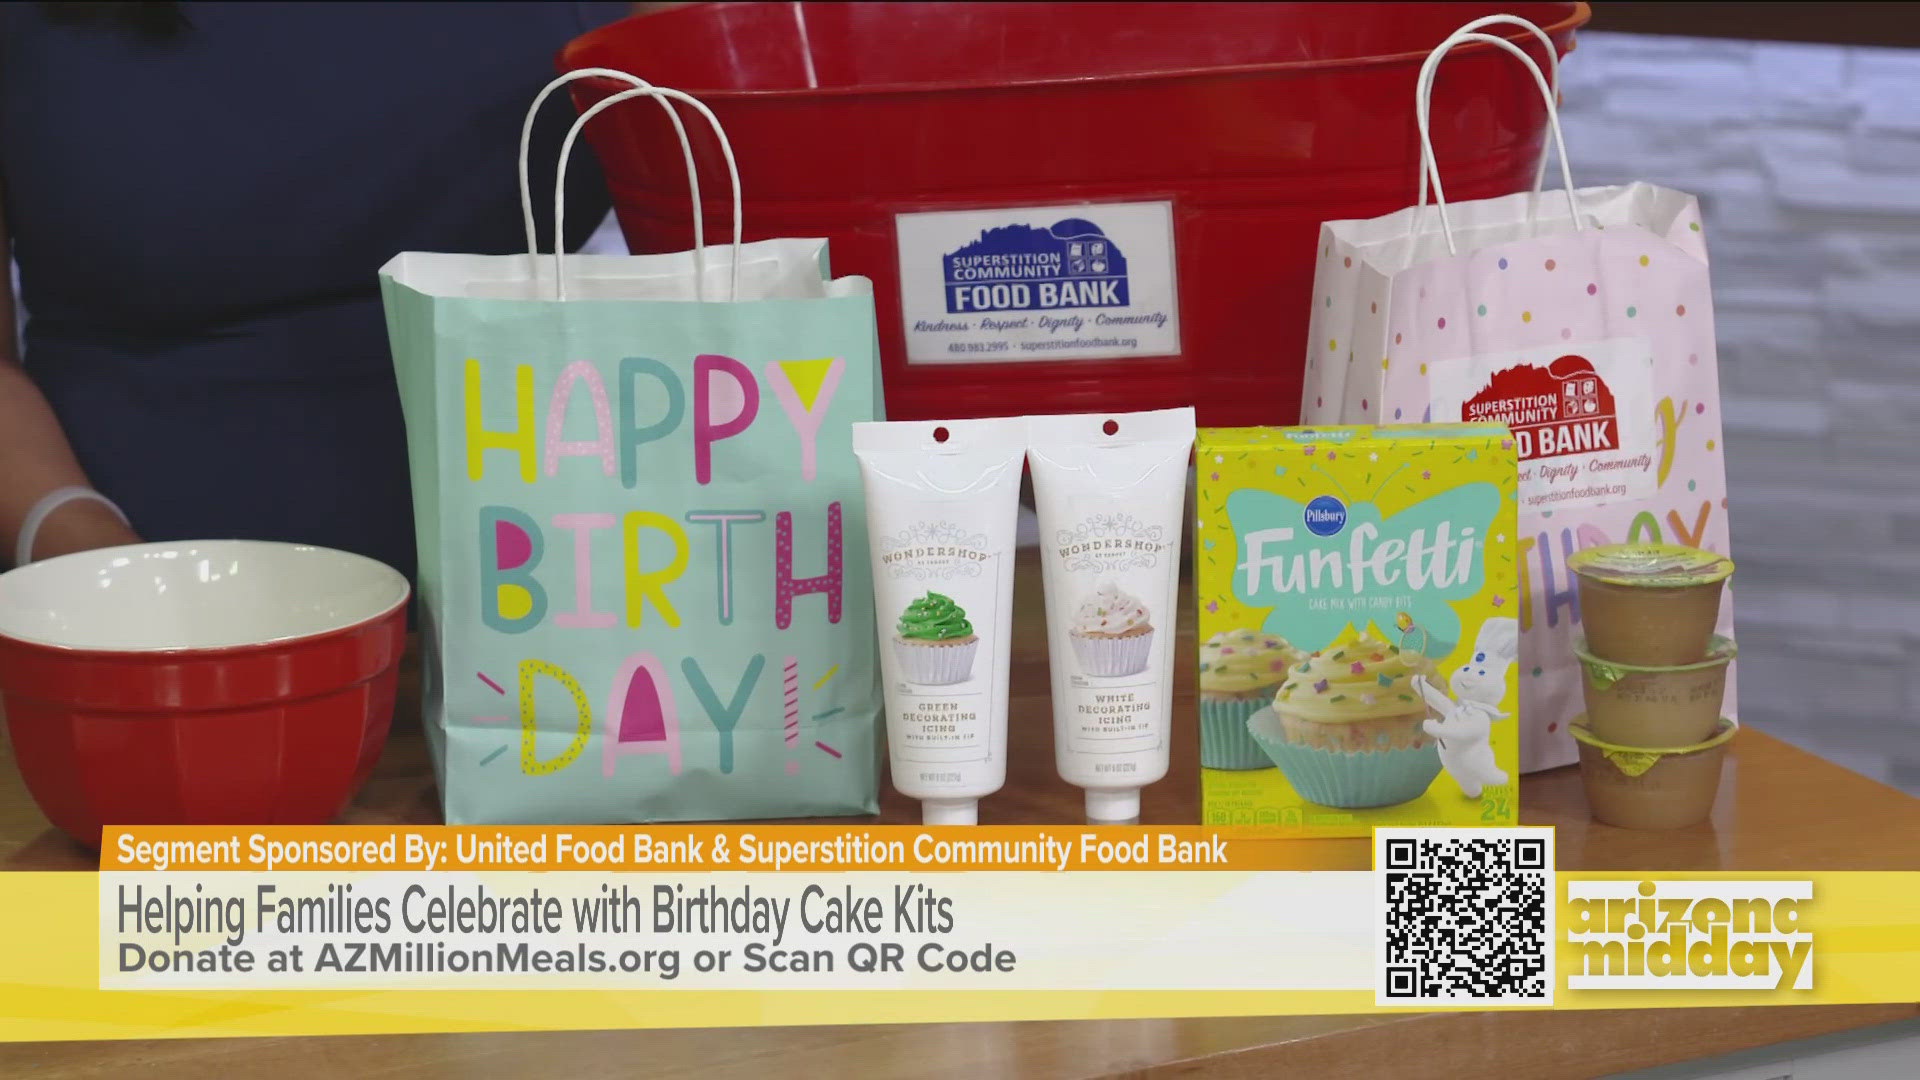 Superstition Community Food Bank partners with United Food Bank to help families in need and offers special birthday cake kits with their Birthday Club program.